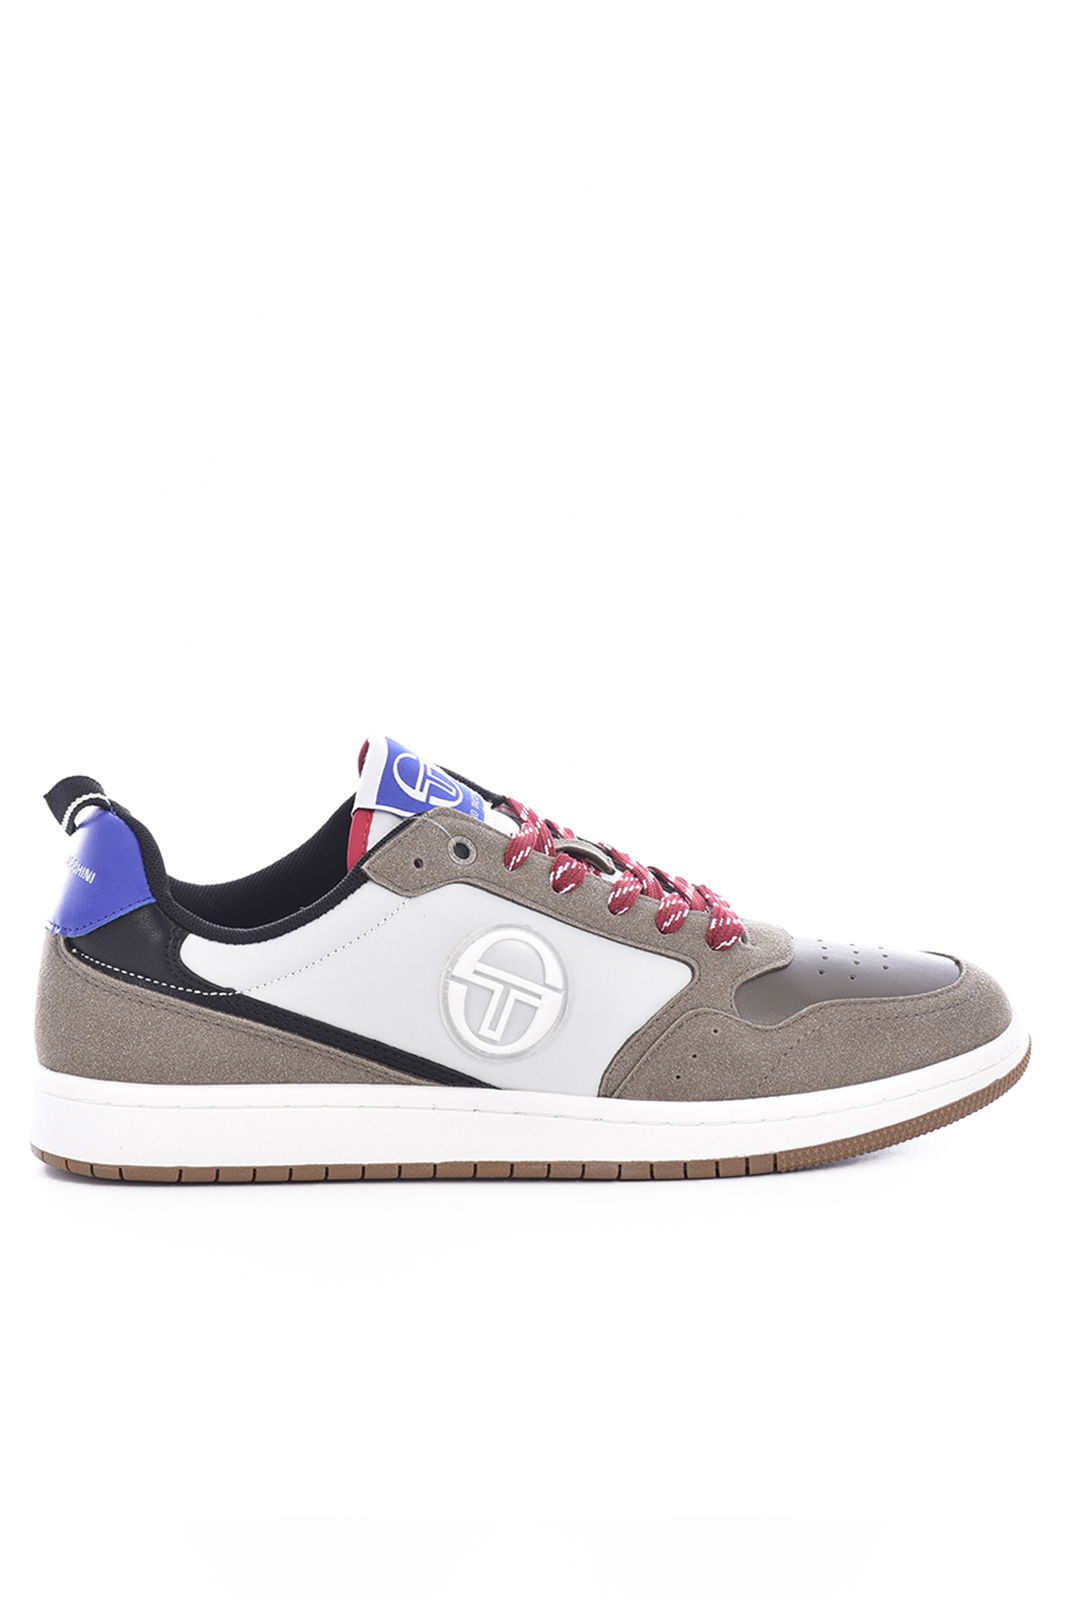 Chaussure caribou gray homme Sergio Tacchini - Stm928210